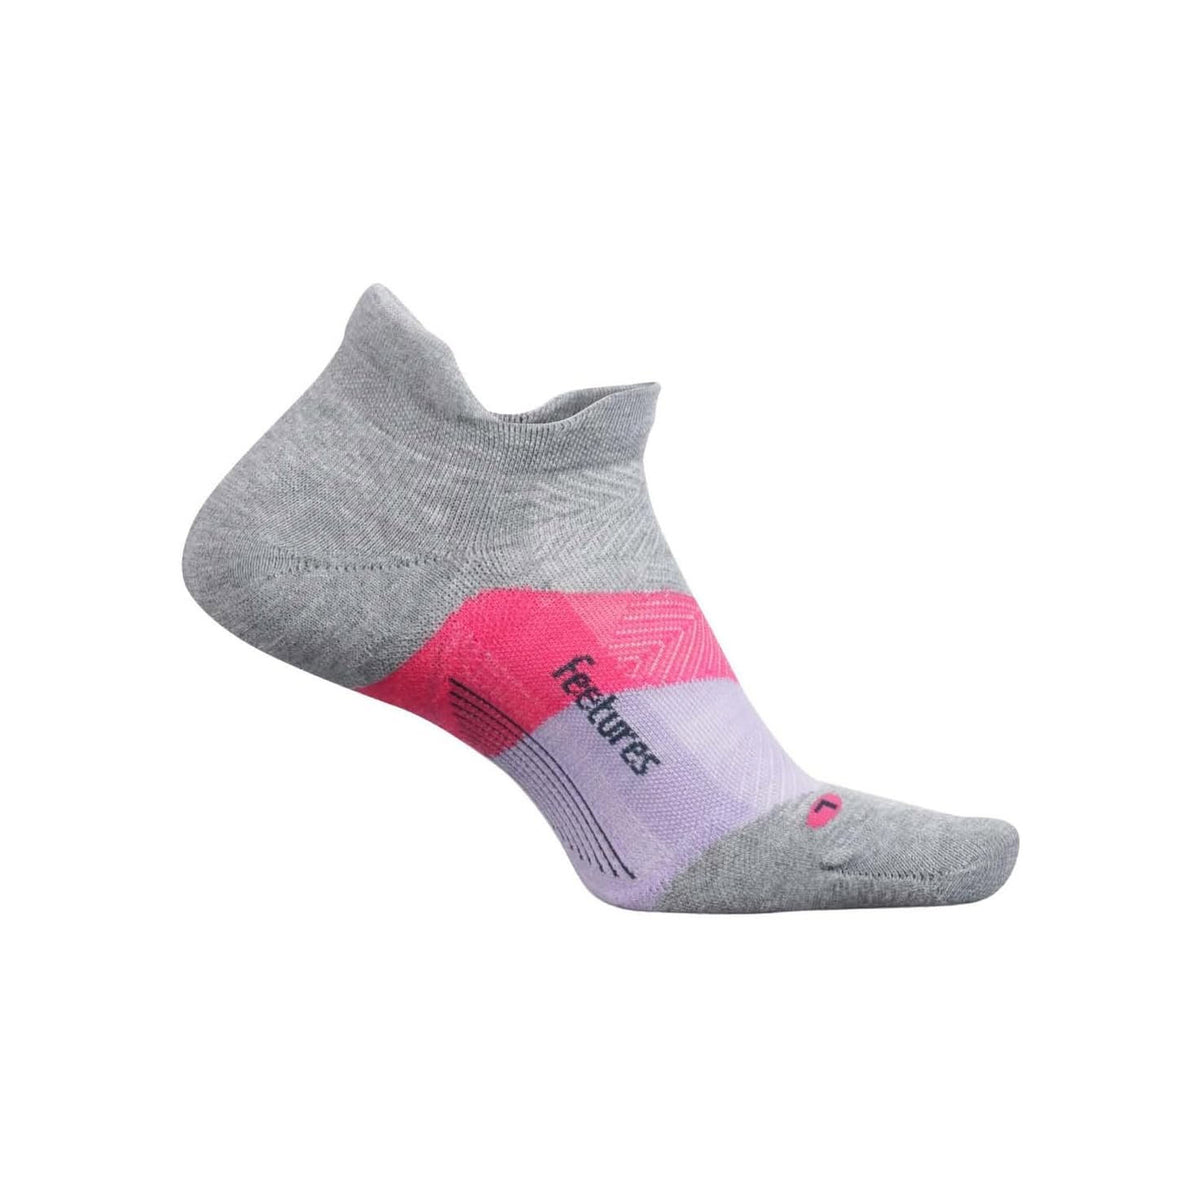 A single ELITE MAX CUSHION NO SHOW TAB GRADUAL GR sport sock featuring a grey body, pink gradient design on the foot, and the word &quot;feature&quot; in bold lettering with added arch support.